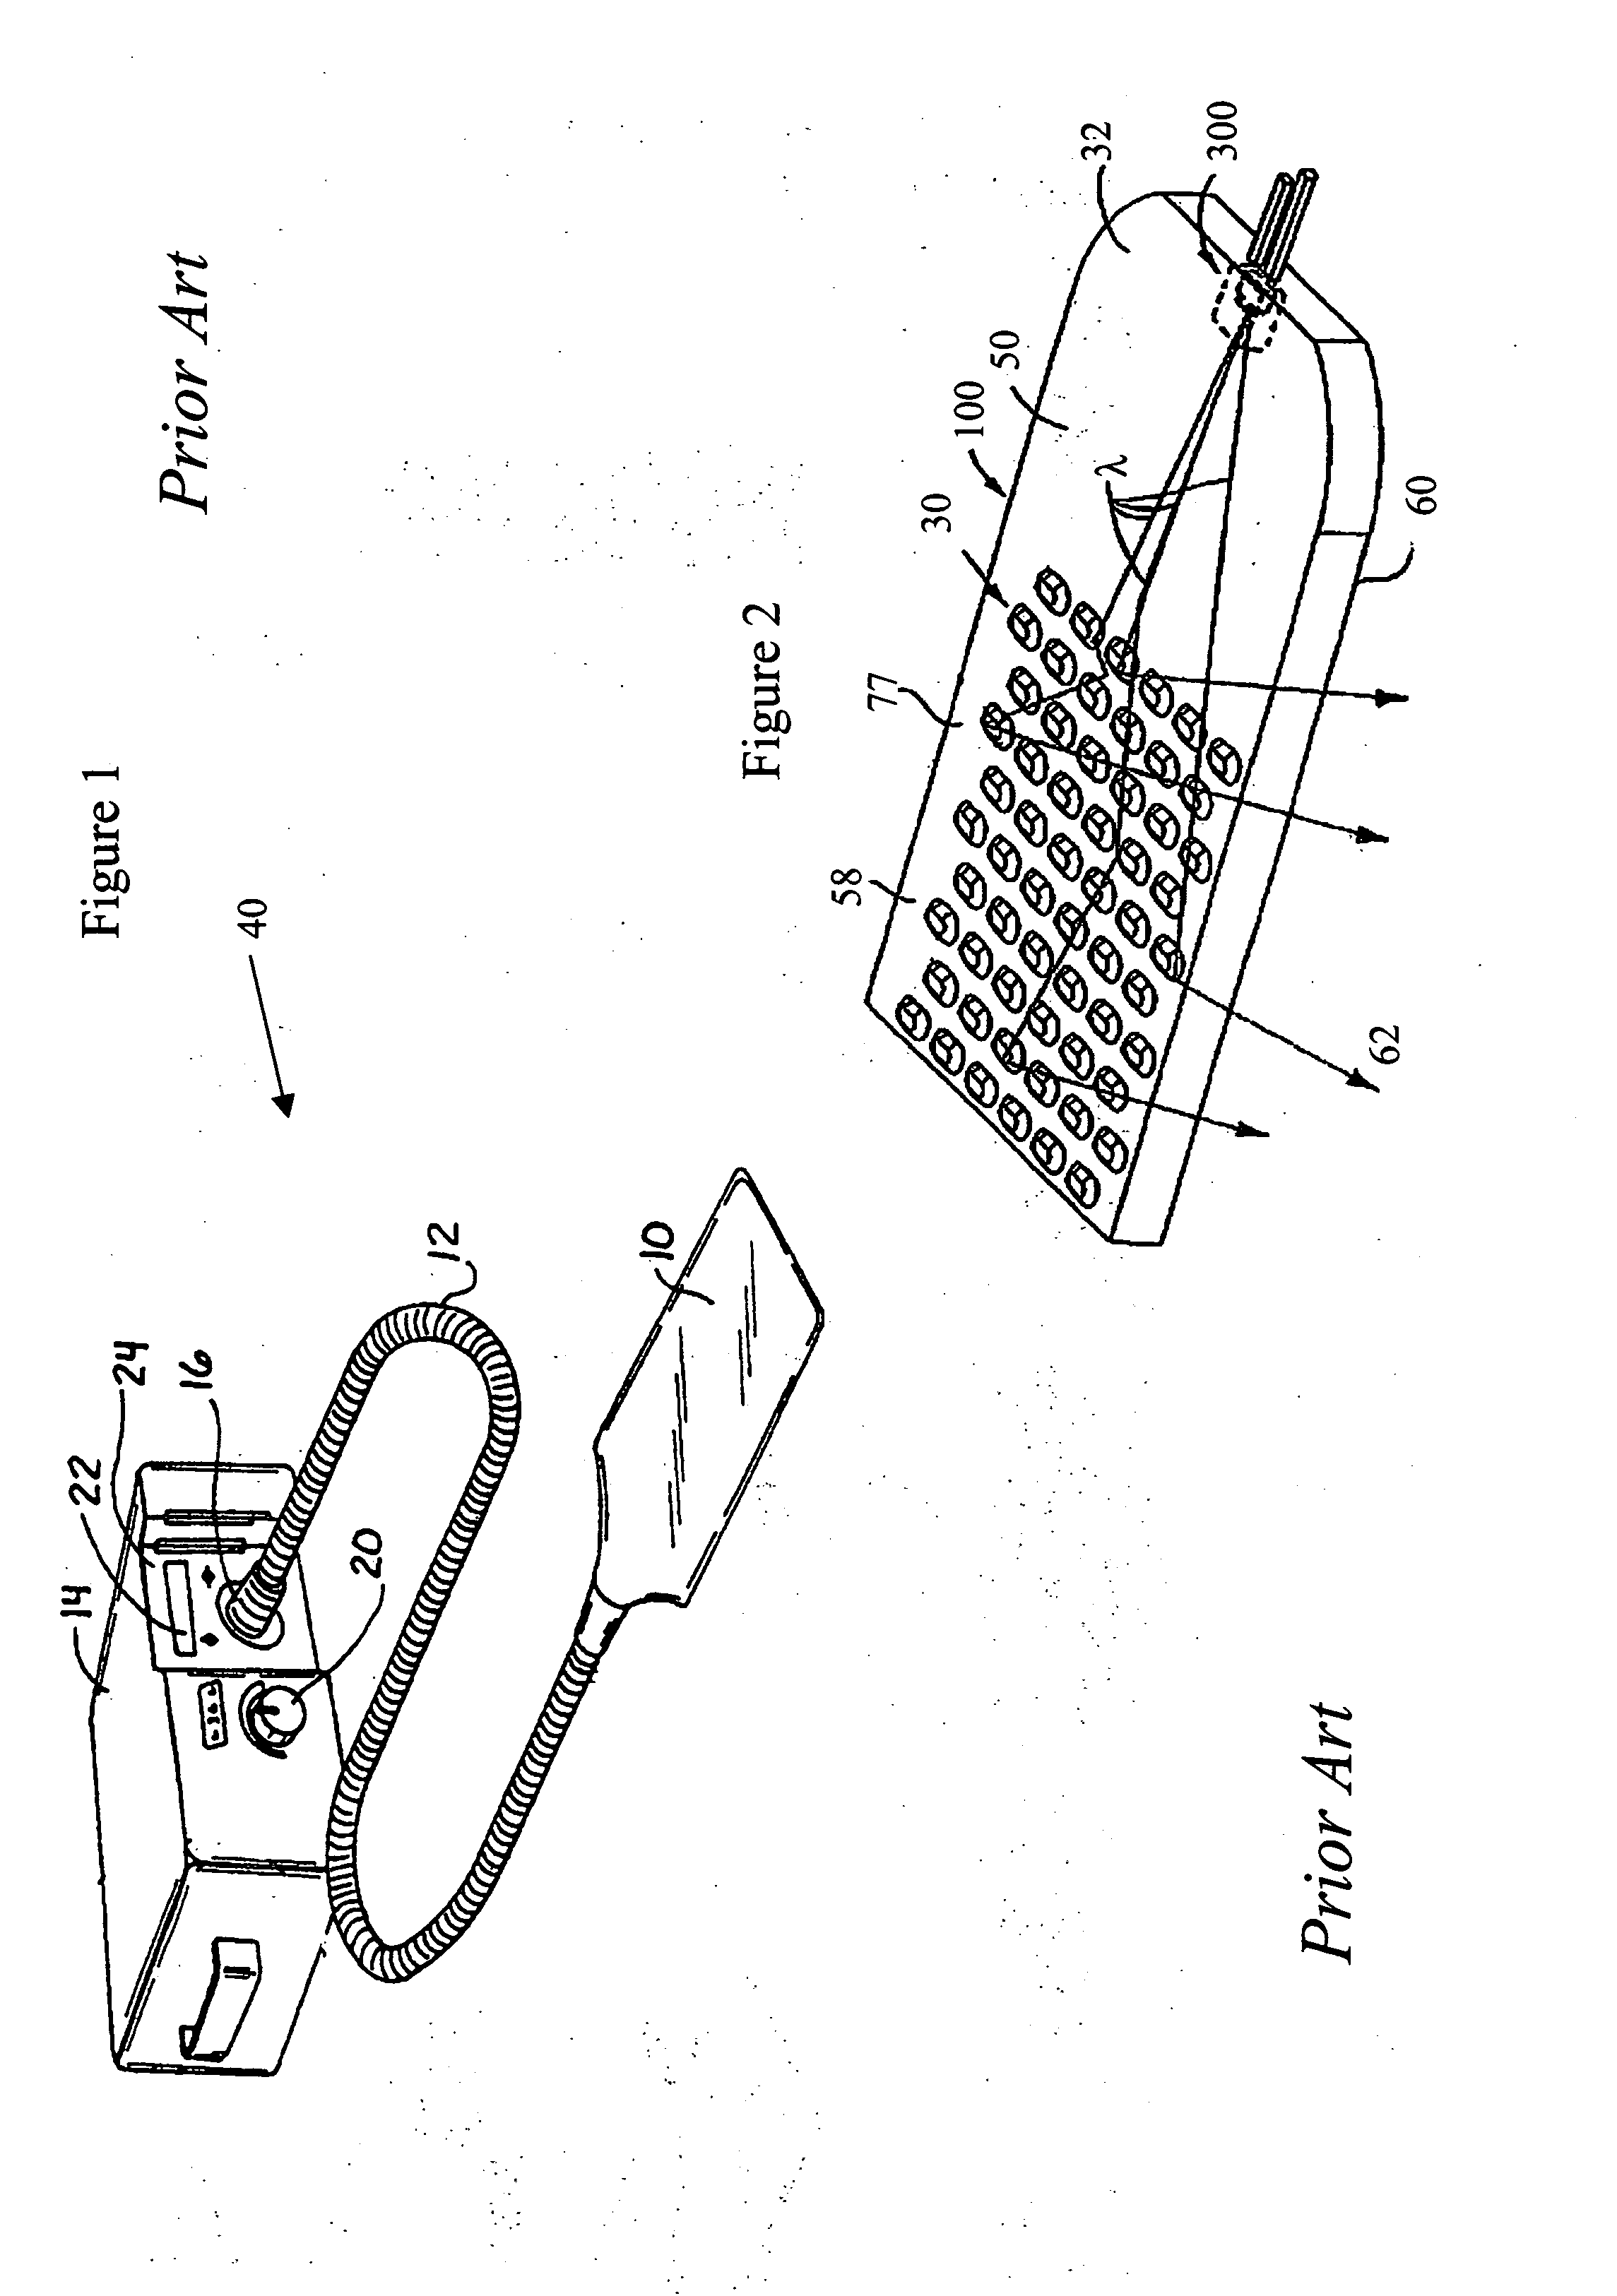 Light guide based light therapy device